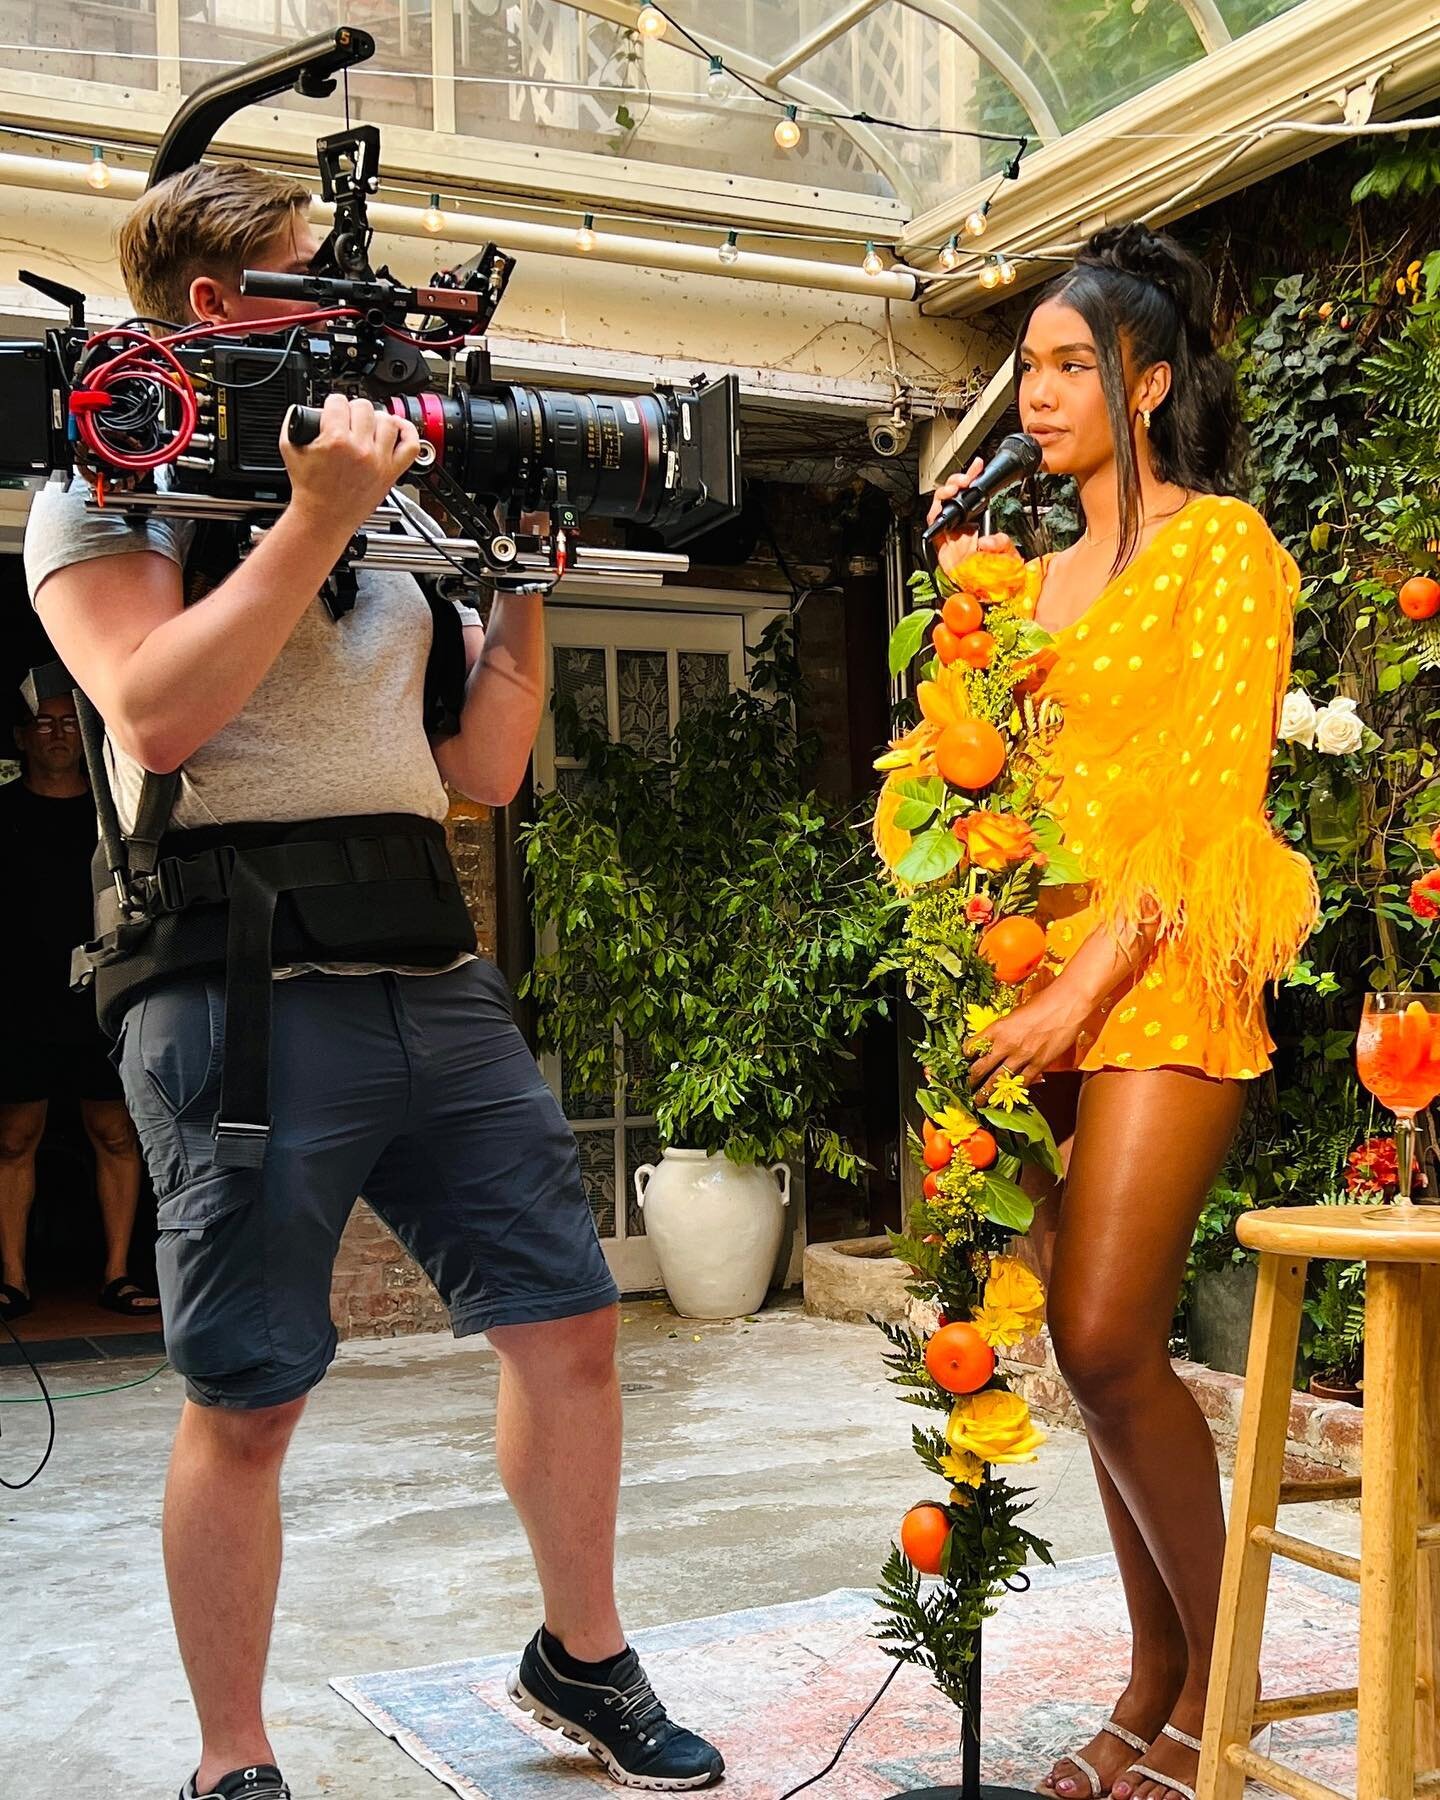 Last summer I got to DP this sunny collaboration between @billboard
@aperolspritzofficial and @instagramber in the beautiful @palmanyc. Rocking the @angenieux Optimi 19.5-94MM is my heaviest handheld build to date 👹Made possible thanks to @easyrig 
